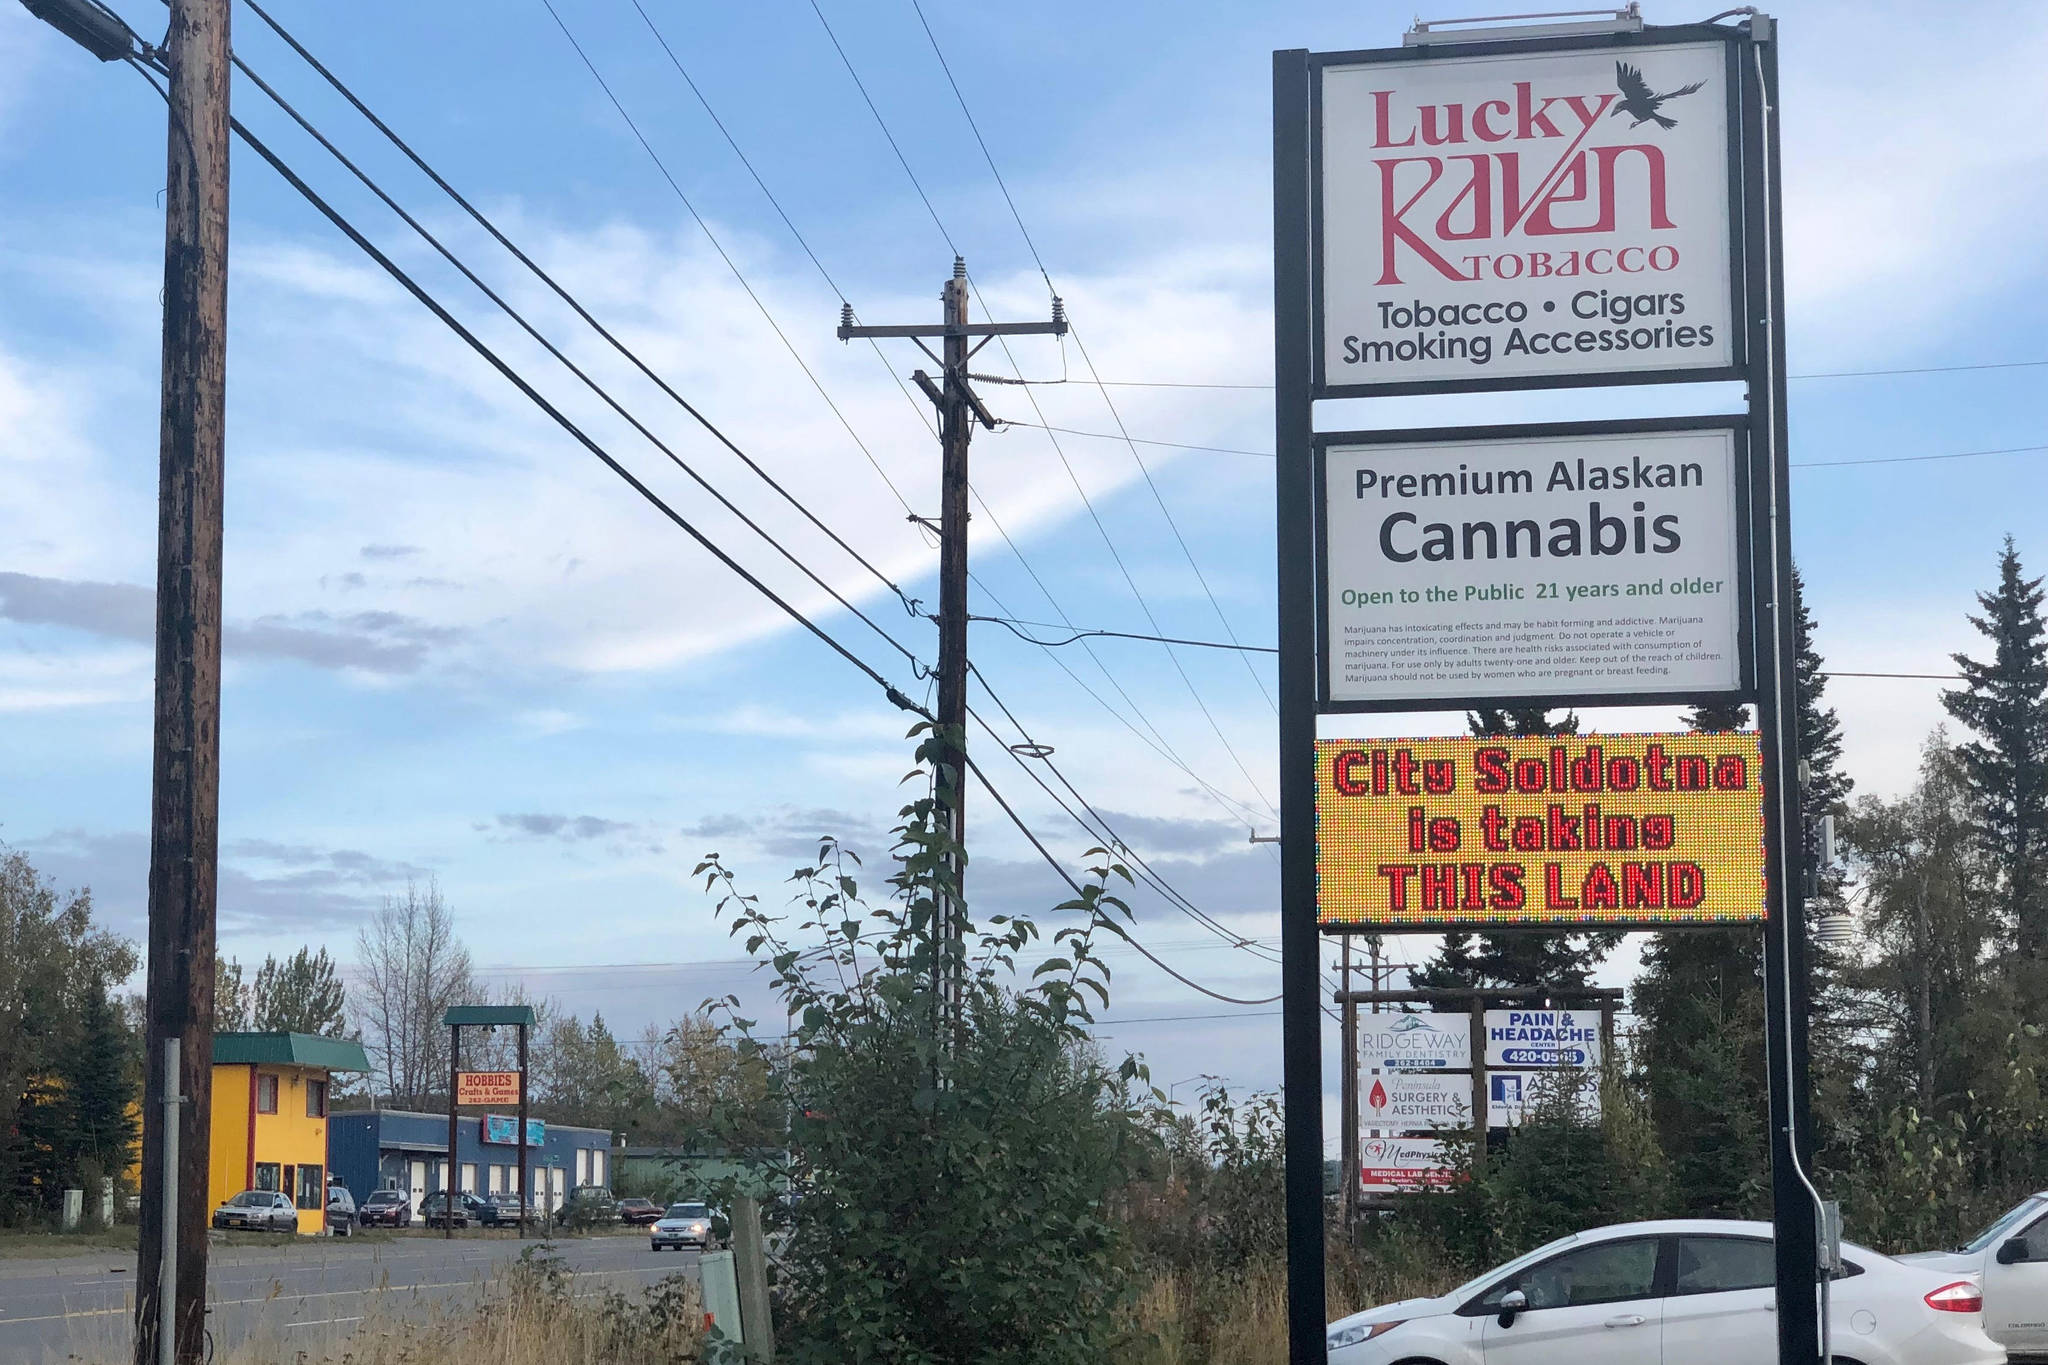 A message opposing annexation is visible on an electronic sign at Lucky Raven Tobacco, located inside one of the proposed areas for annexation, on Thursday, Sept. 5, 2019, near Soldotna, Alaska. The city will host a public hearing on the annexation proposal Saturday, Sept. 7, 2019. (Photo by Victoria Petersen/Peninsula Clarion)